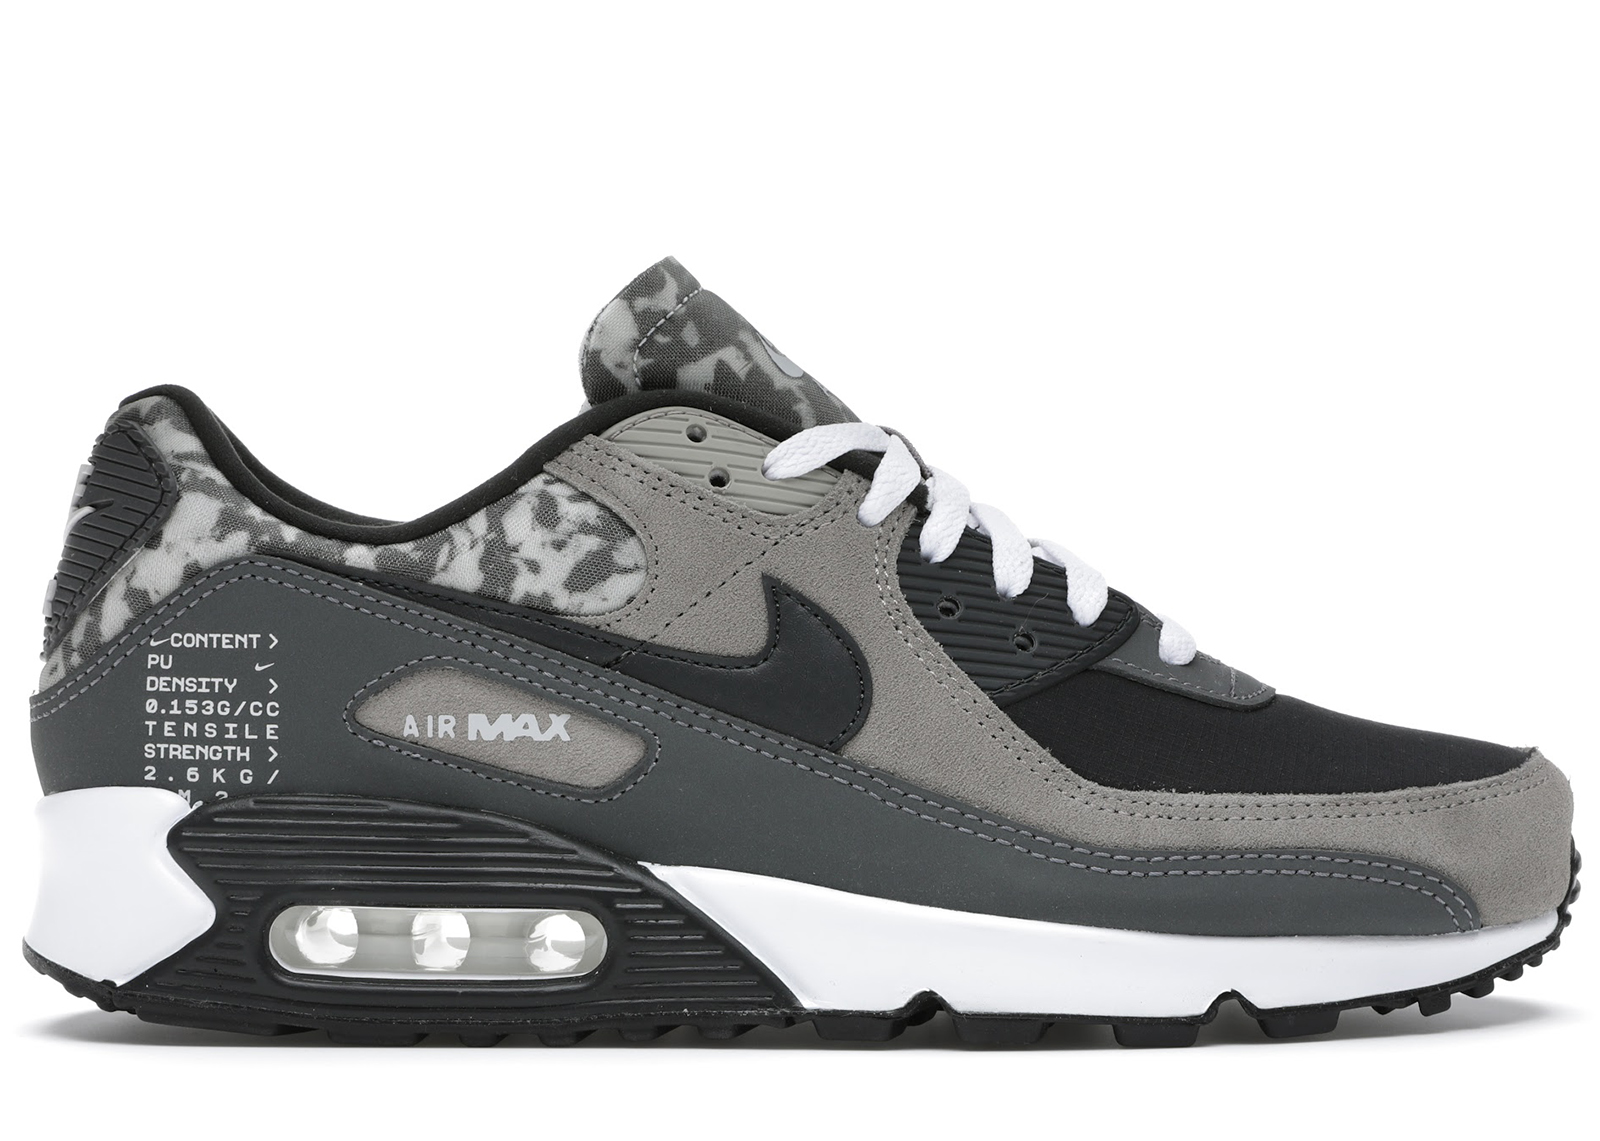 Nike Air Max 1 Patta Waves Monarch (with Bracelet) - DH1348-001 